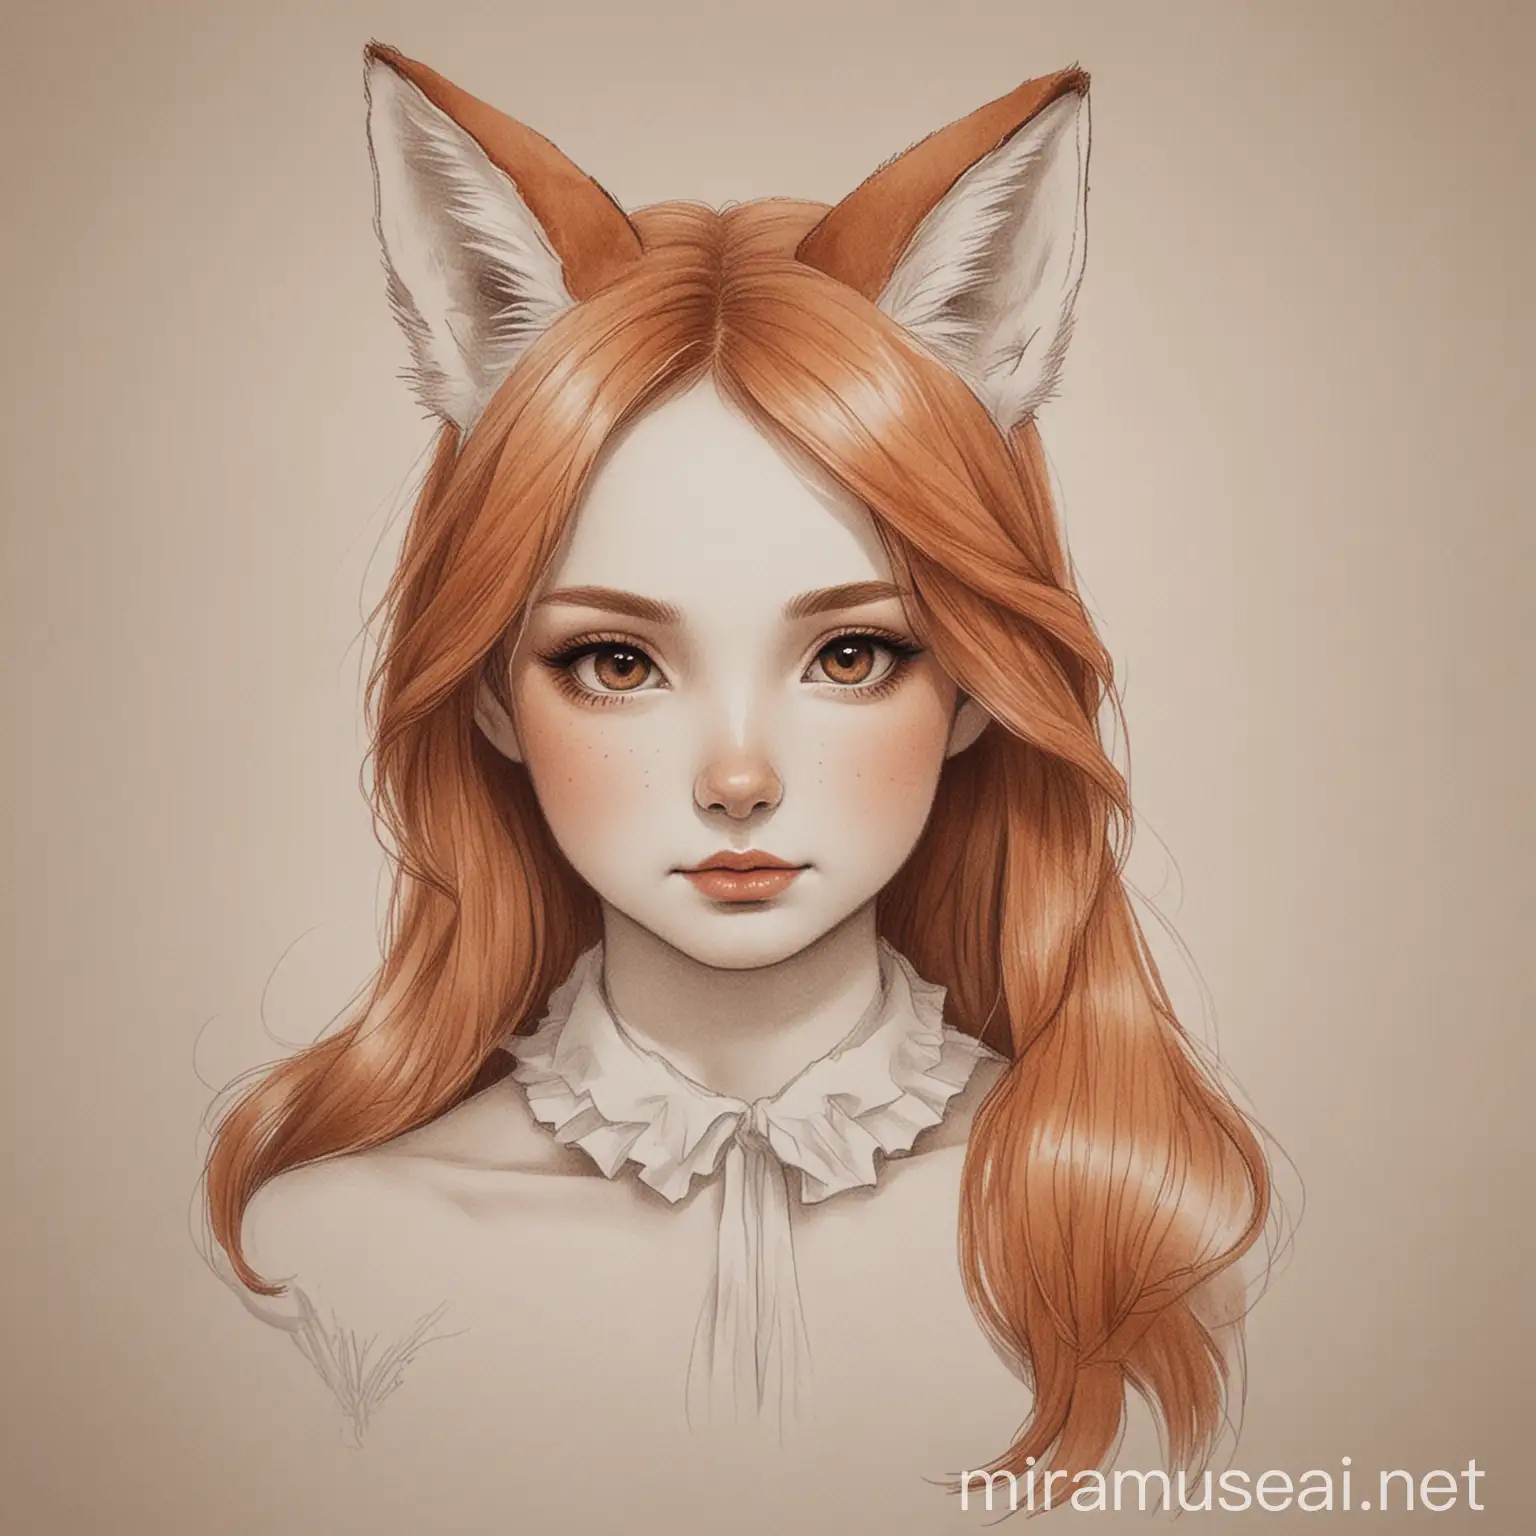 Whimsical Girl Dressed as a Fox with White Ears and Tail